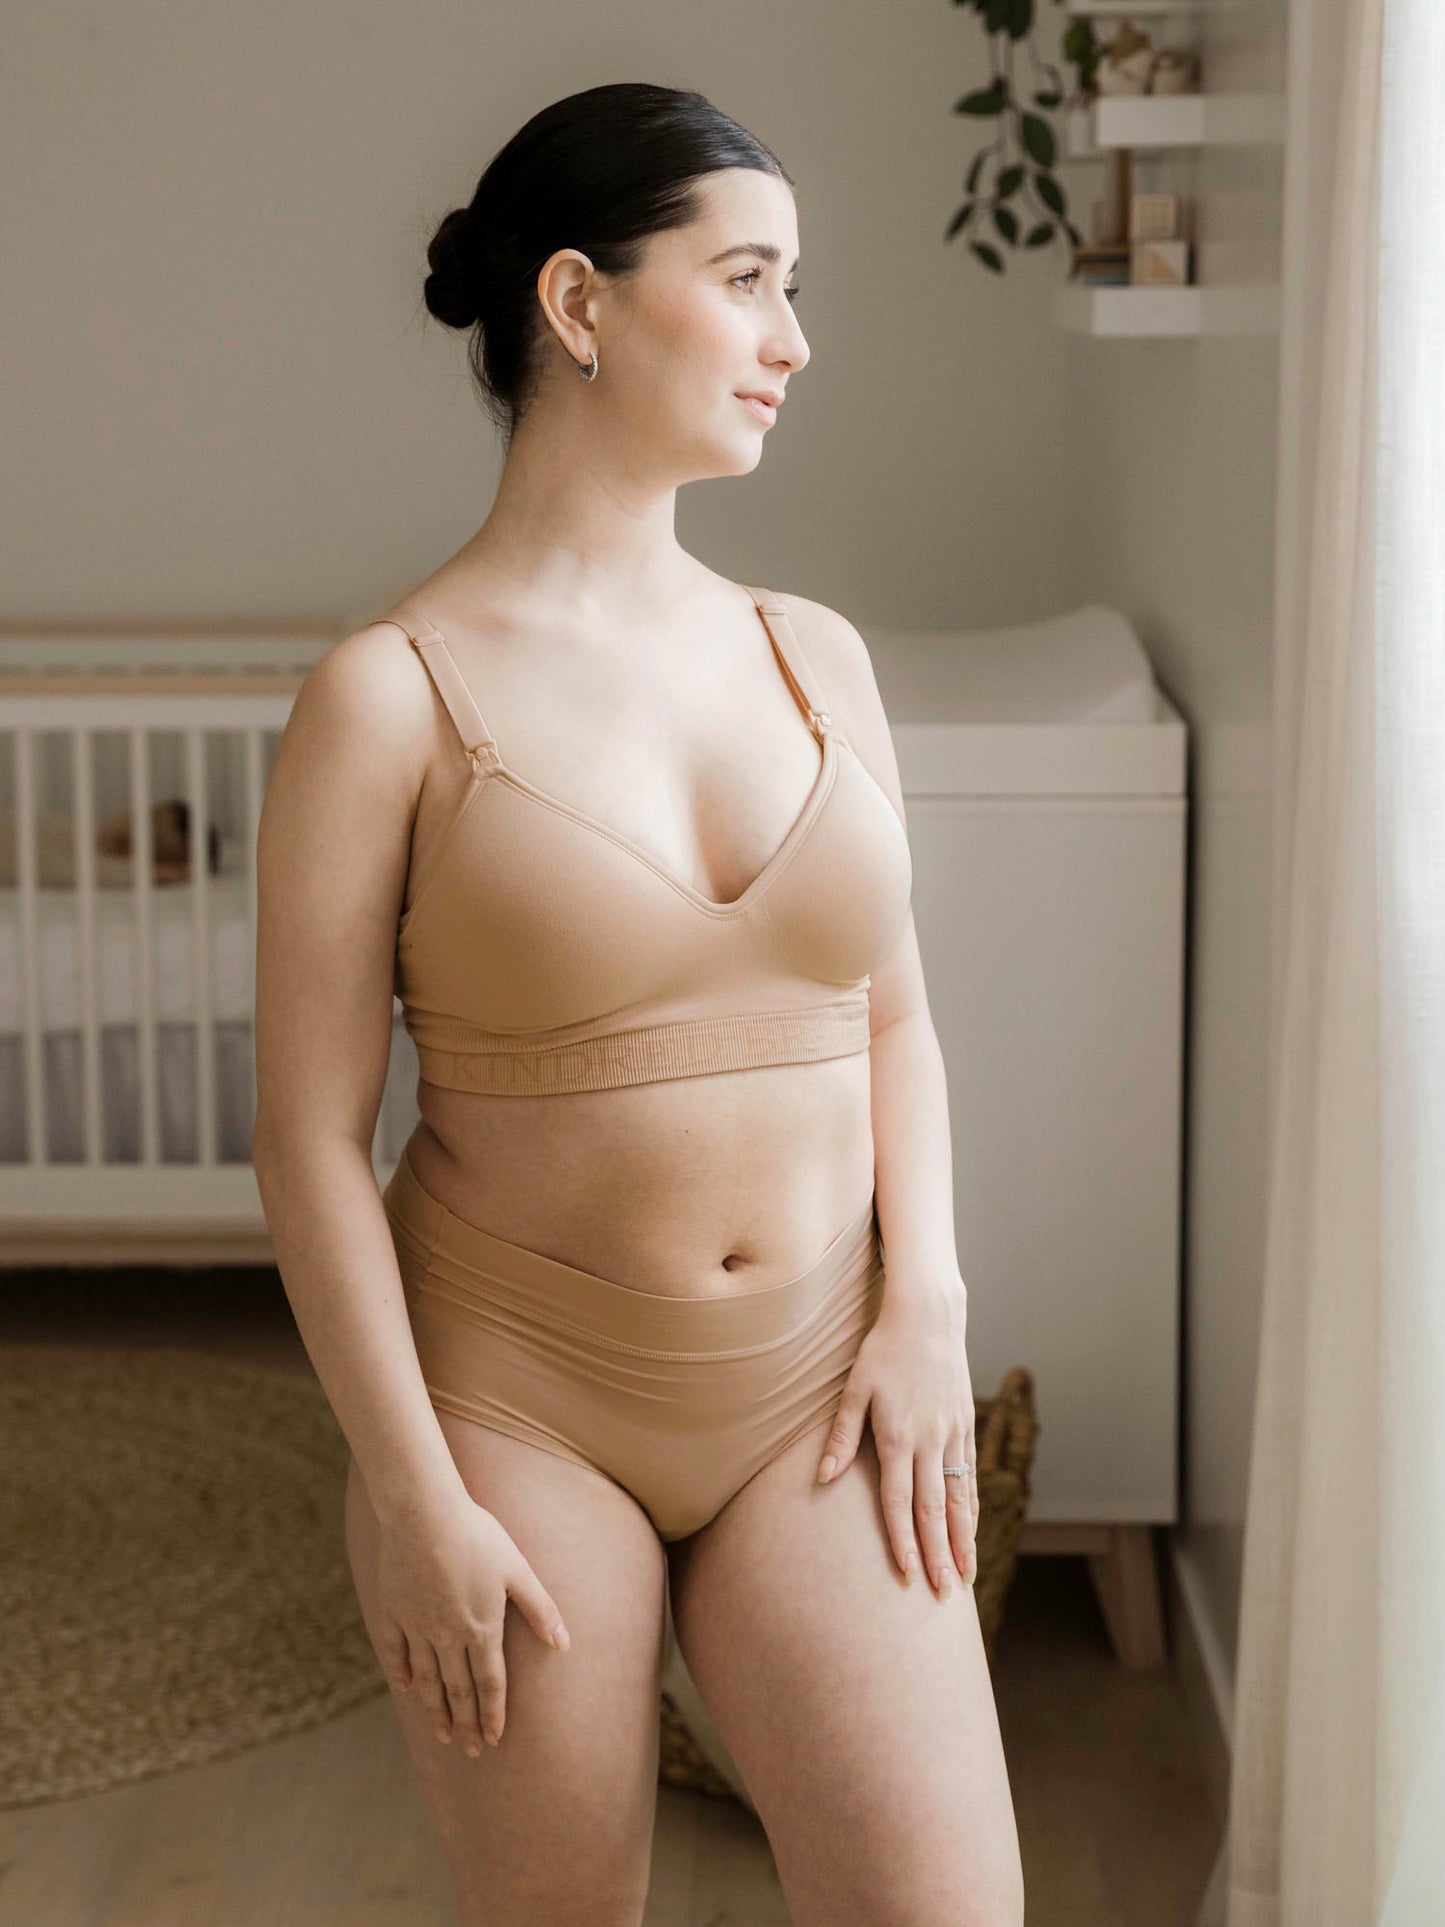 Indo-Asian News Service-AWARD-WINNING MATERNITY WEAR BRAND KINDRED BRAVELY  LAUNCHES SIGNATURE SUBLIME® CONTOUR HANDS-FREE PUMPING & NURSING BRA